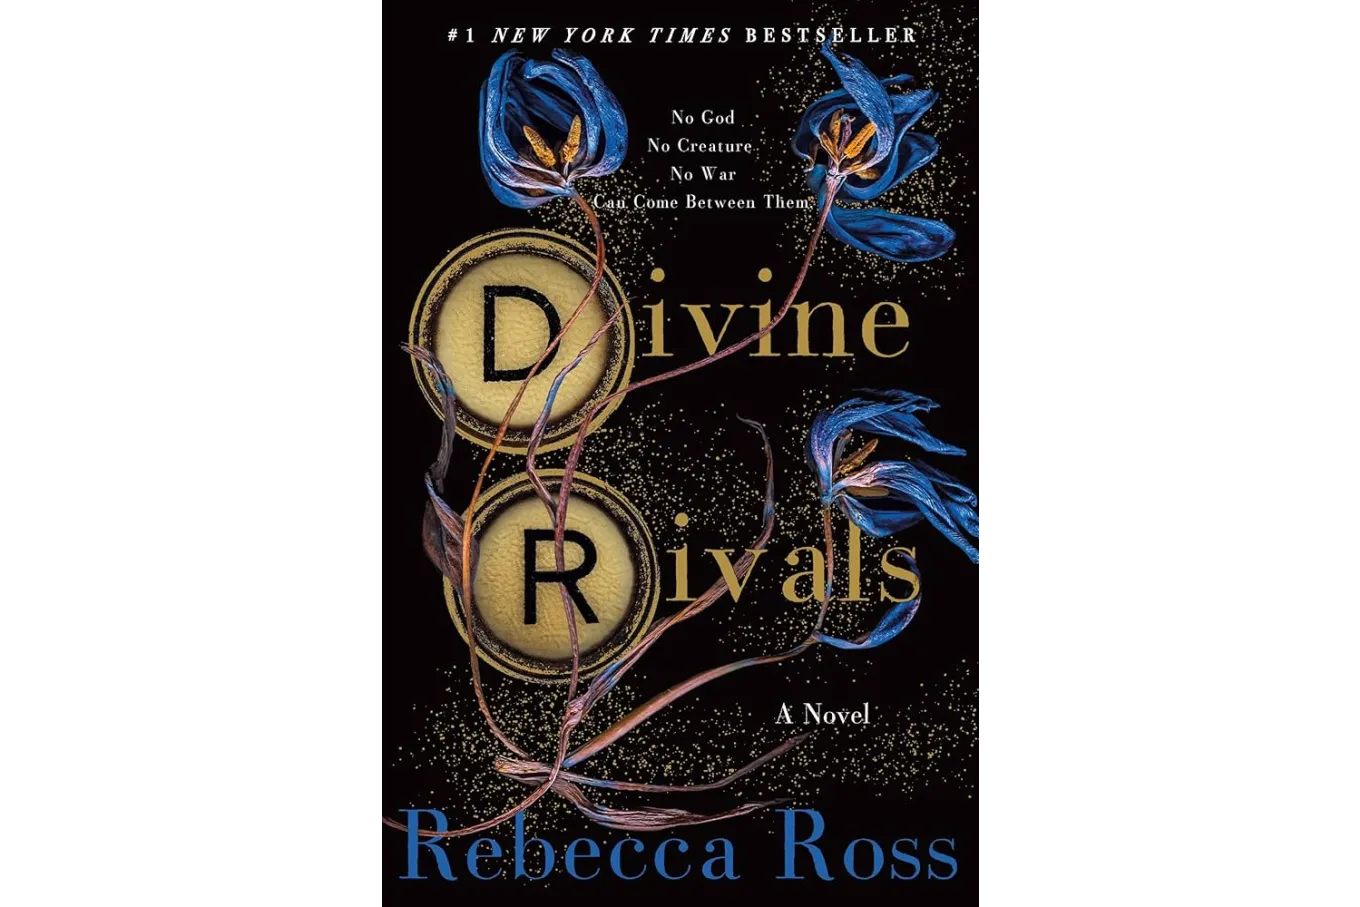 Cover of Divine Rivals